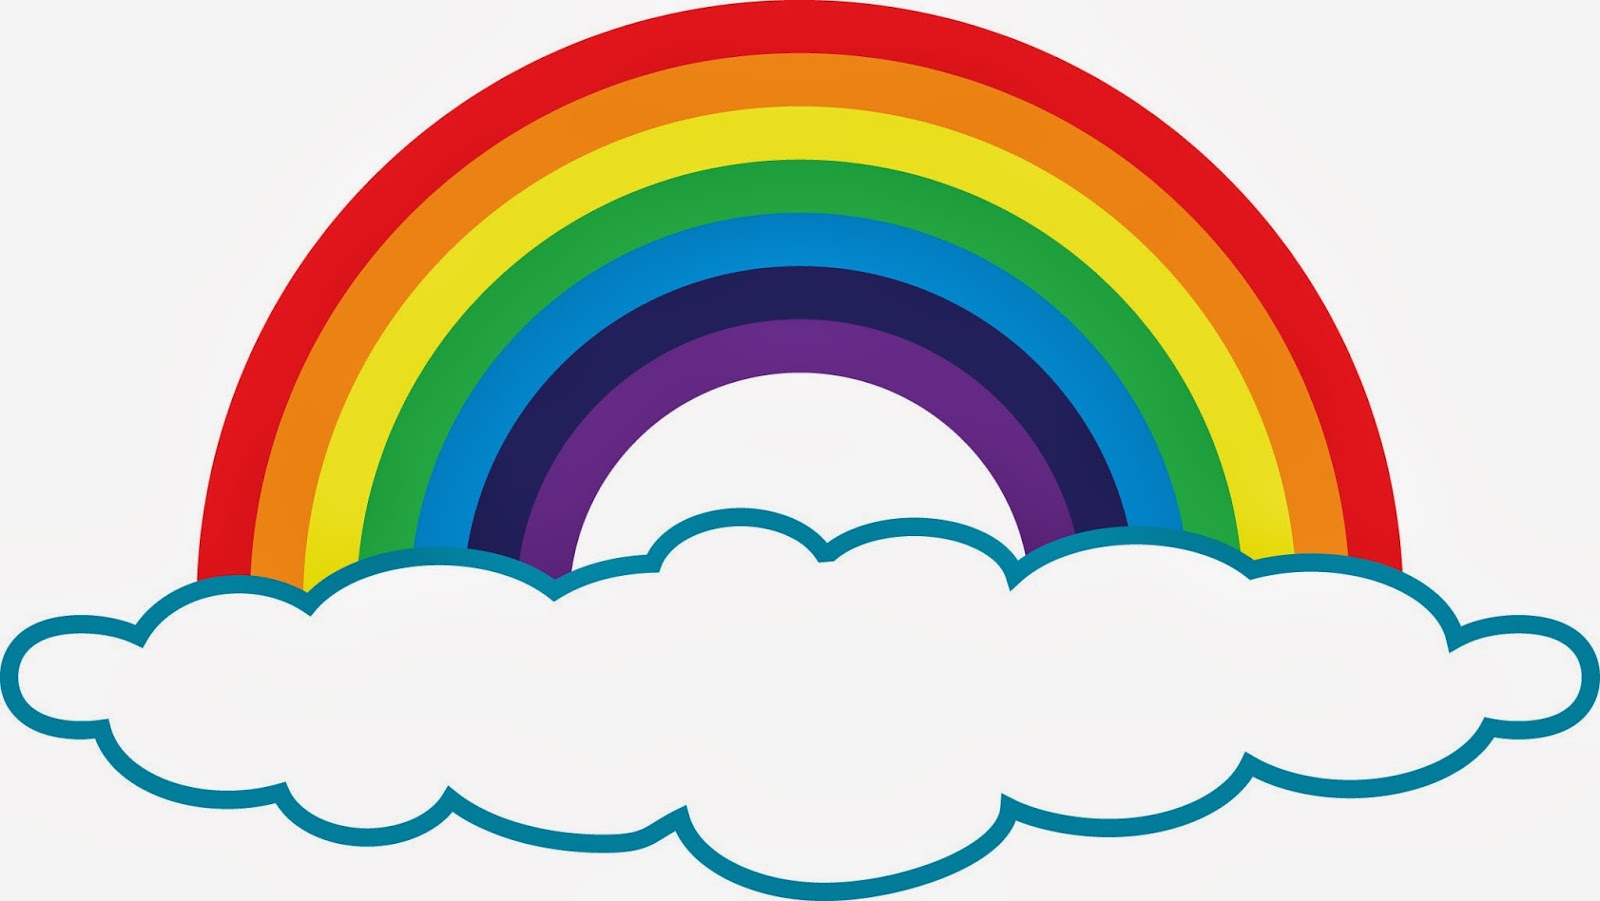 free clipart images rainbow - photo #22